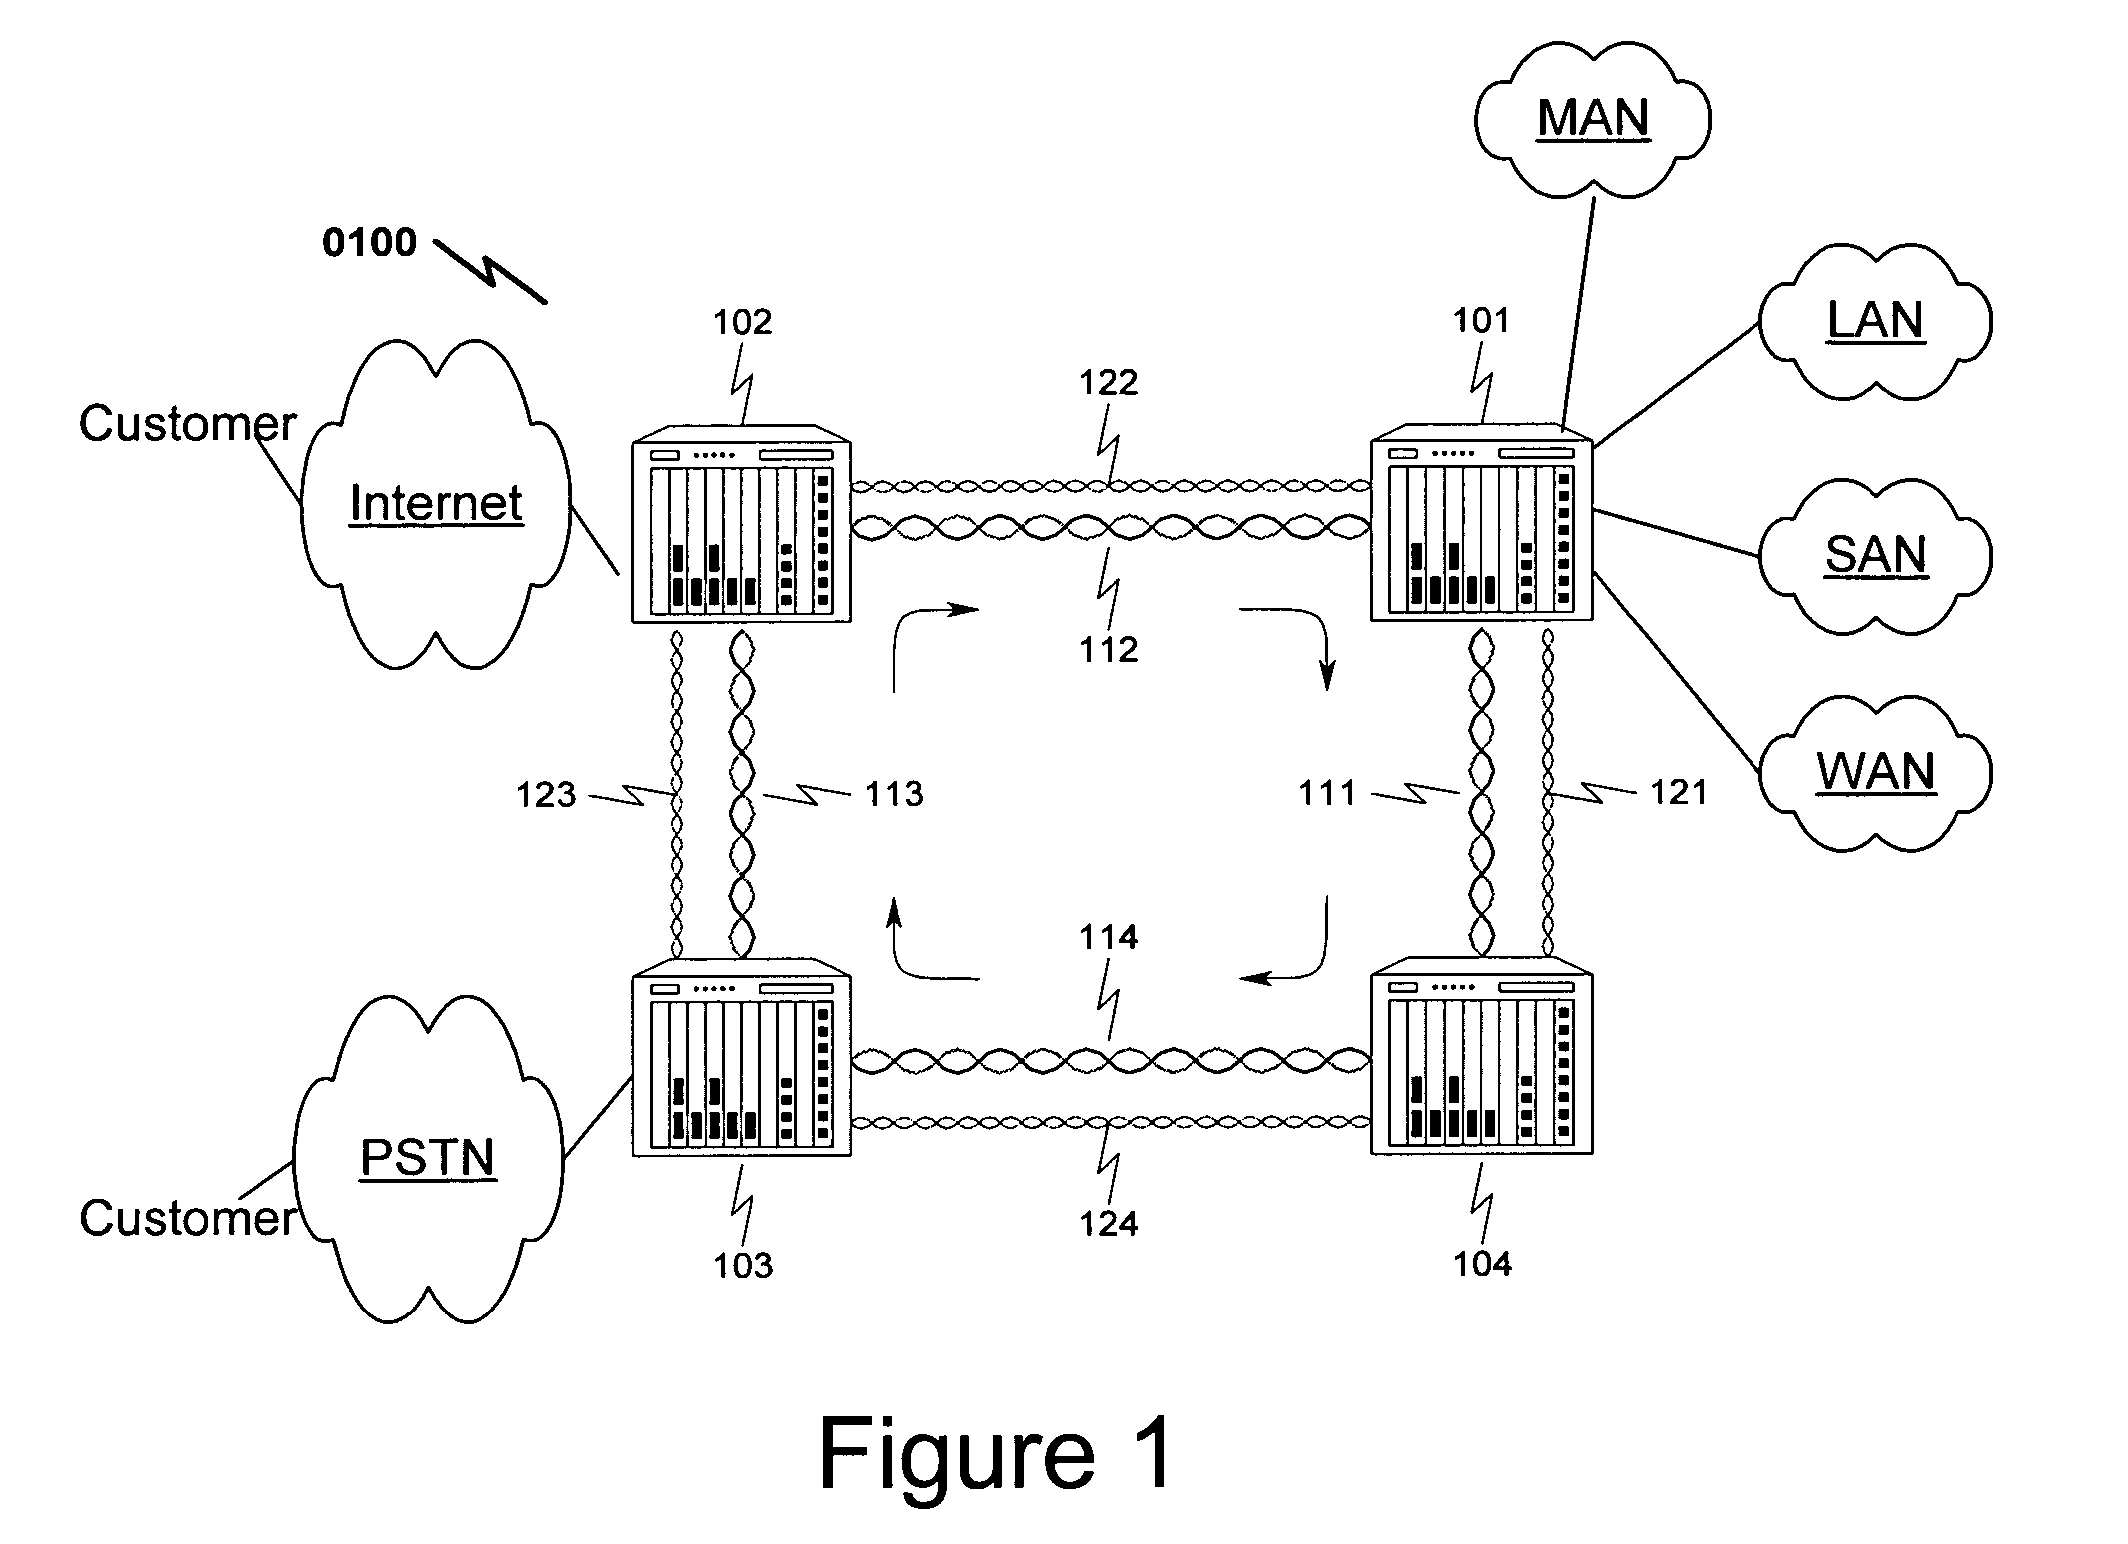 Method of adapting an optical network to provide lightpaths to dynamically assigned higher priority traffic